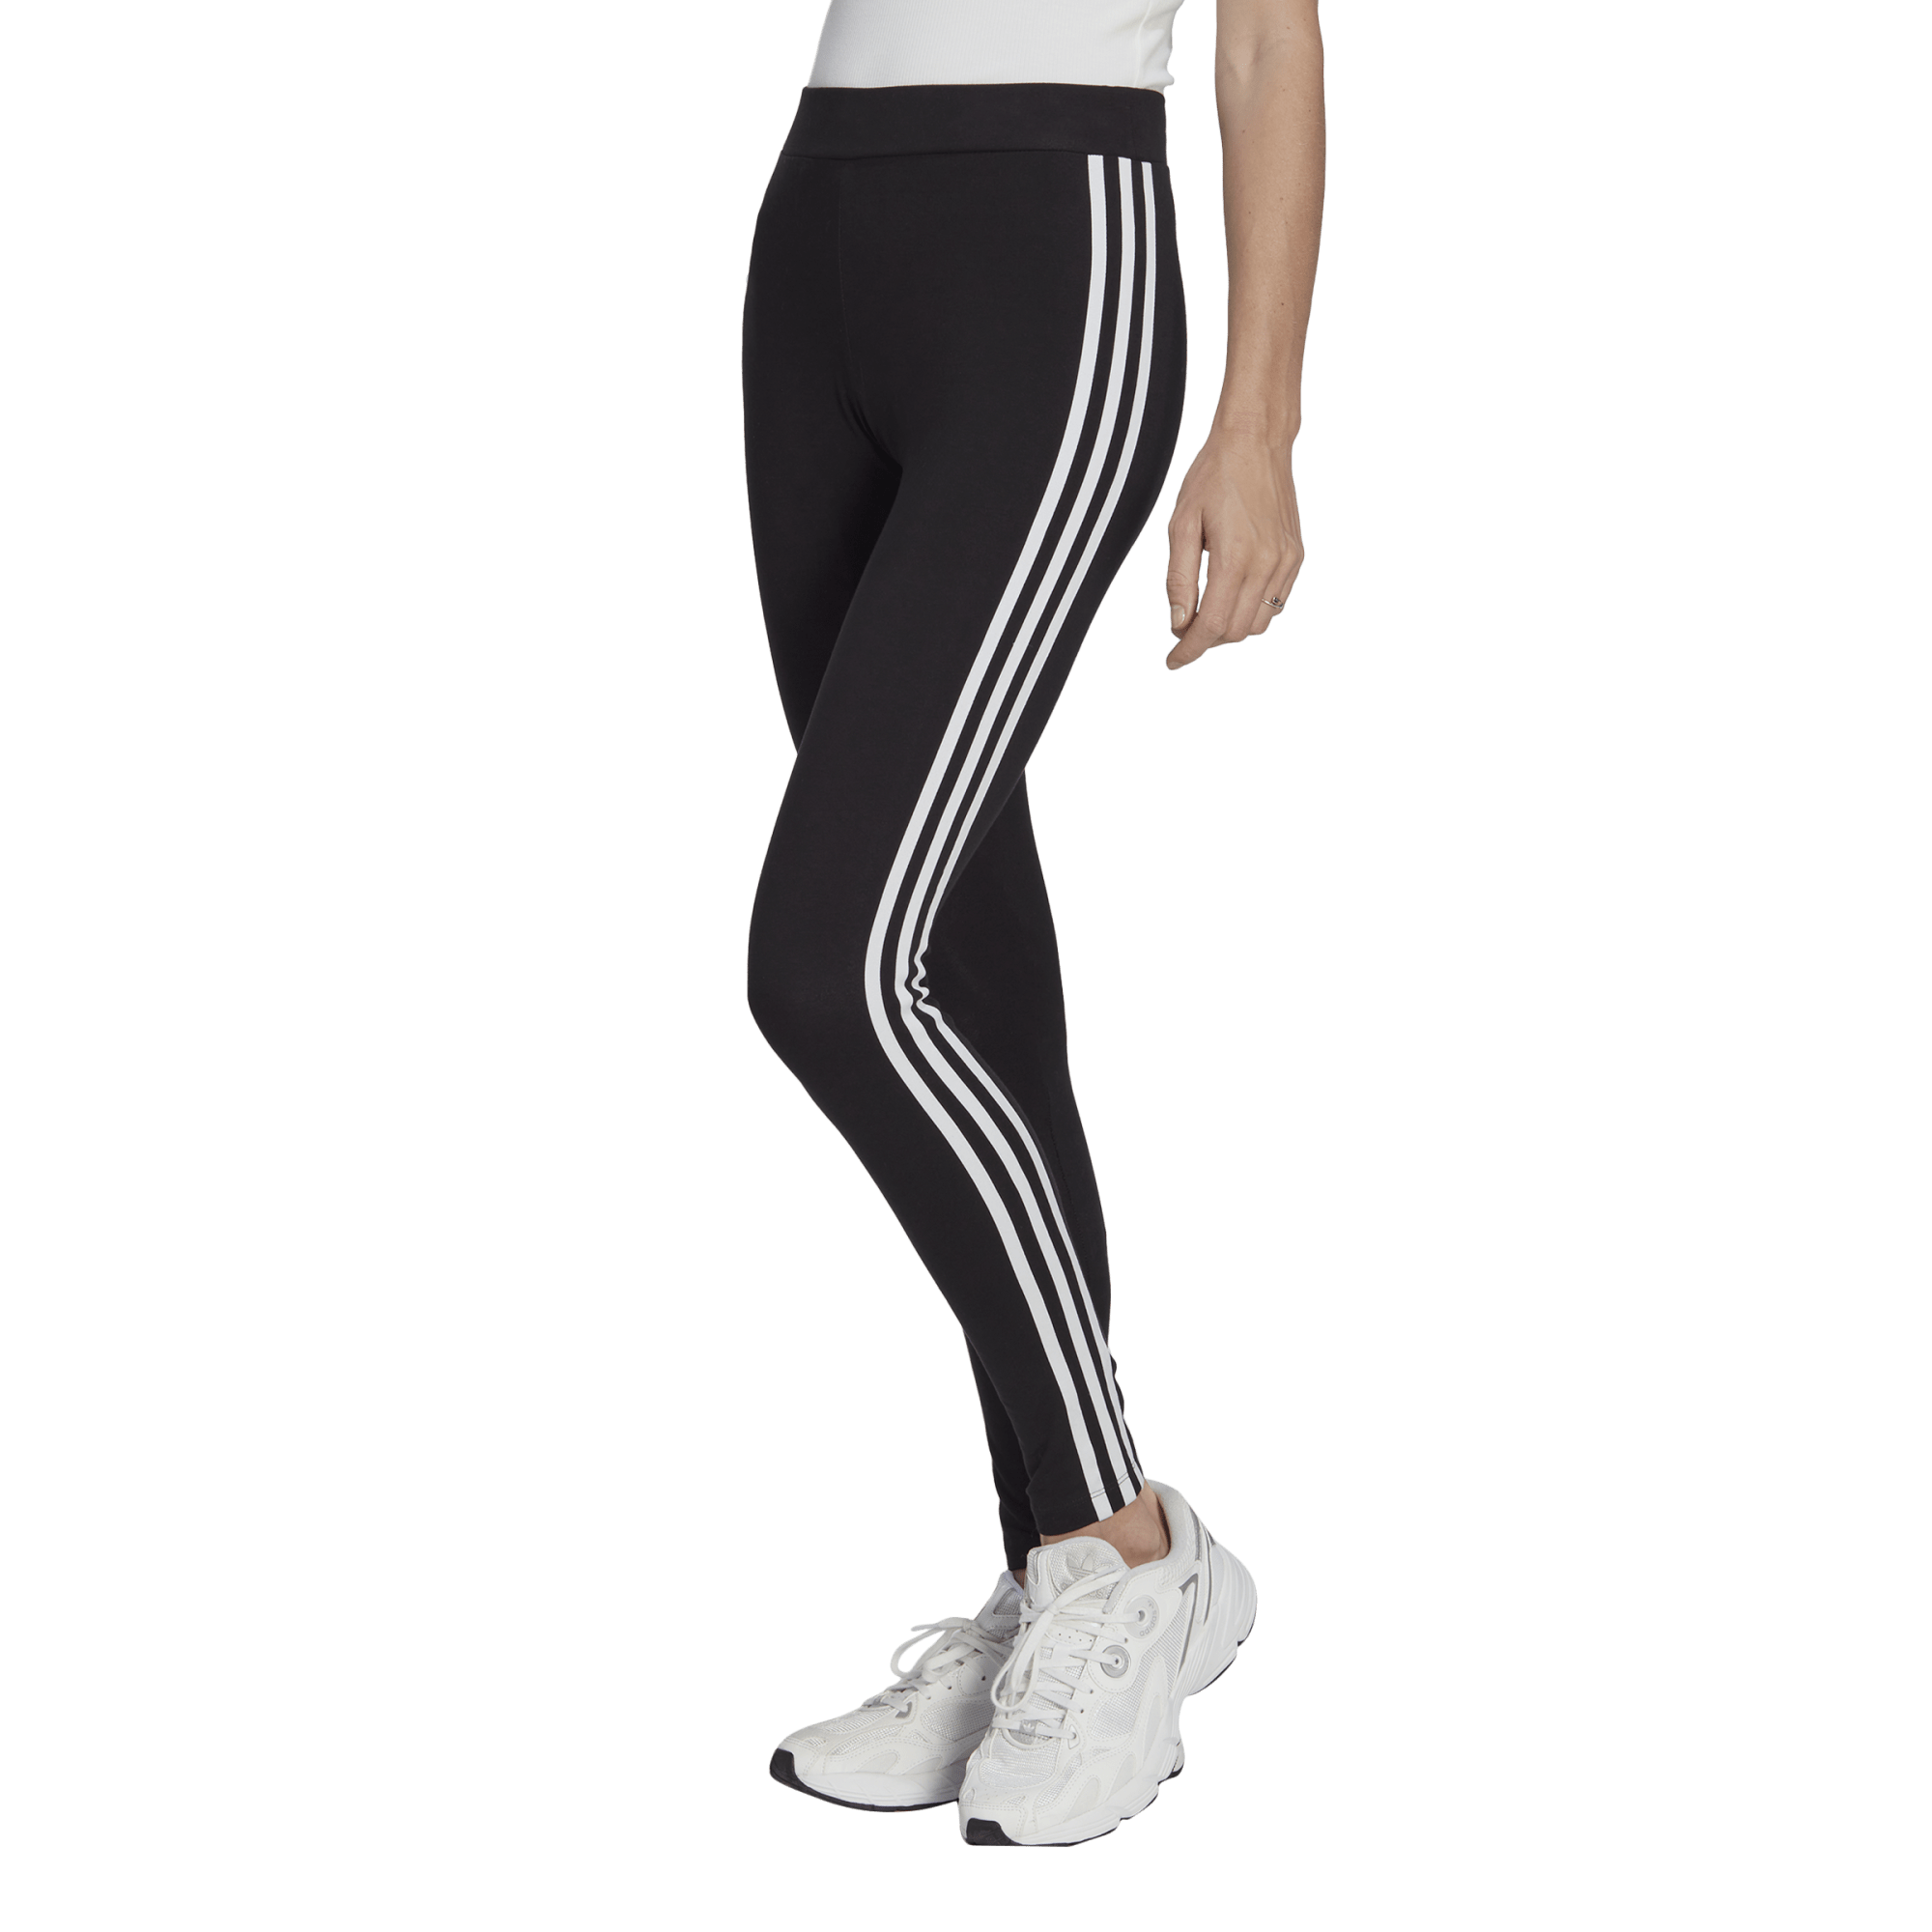 ADIDAS Women Ultimate Fit 3/4 Tights Leggings Size XS-L – AAGsport